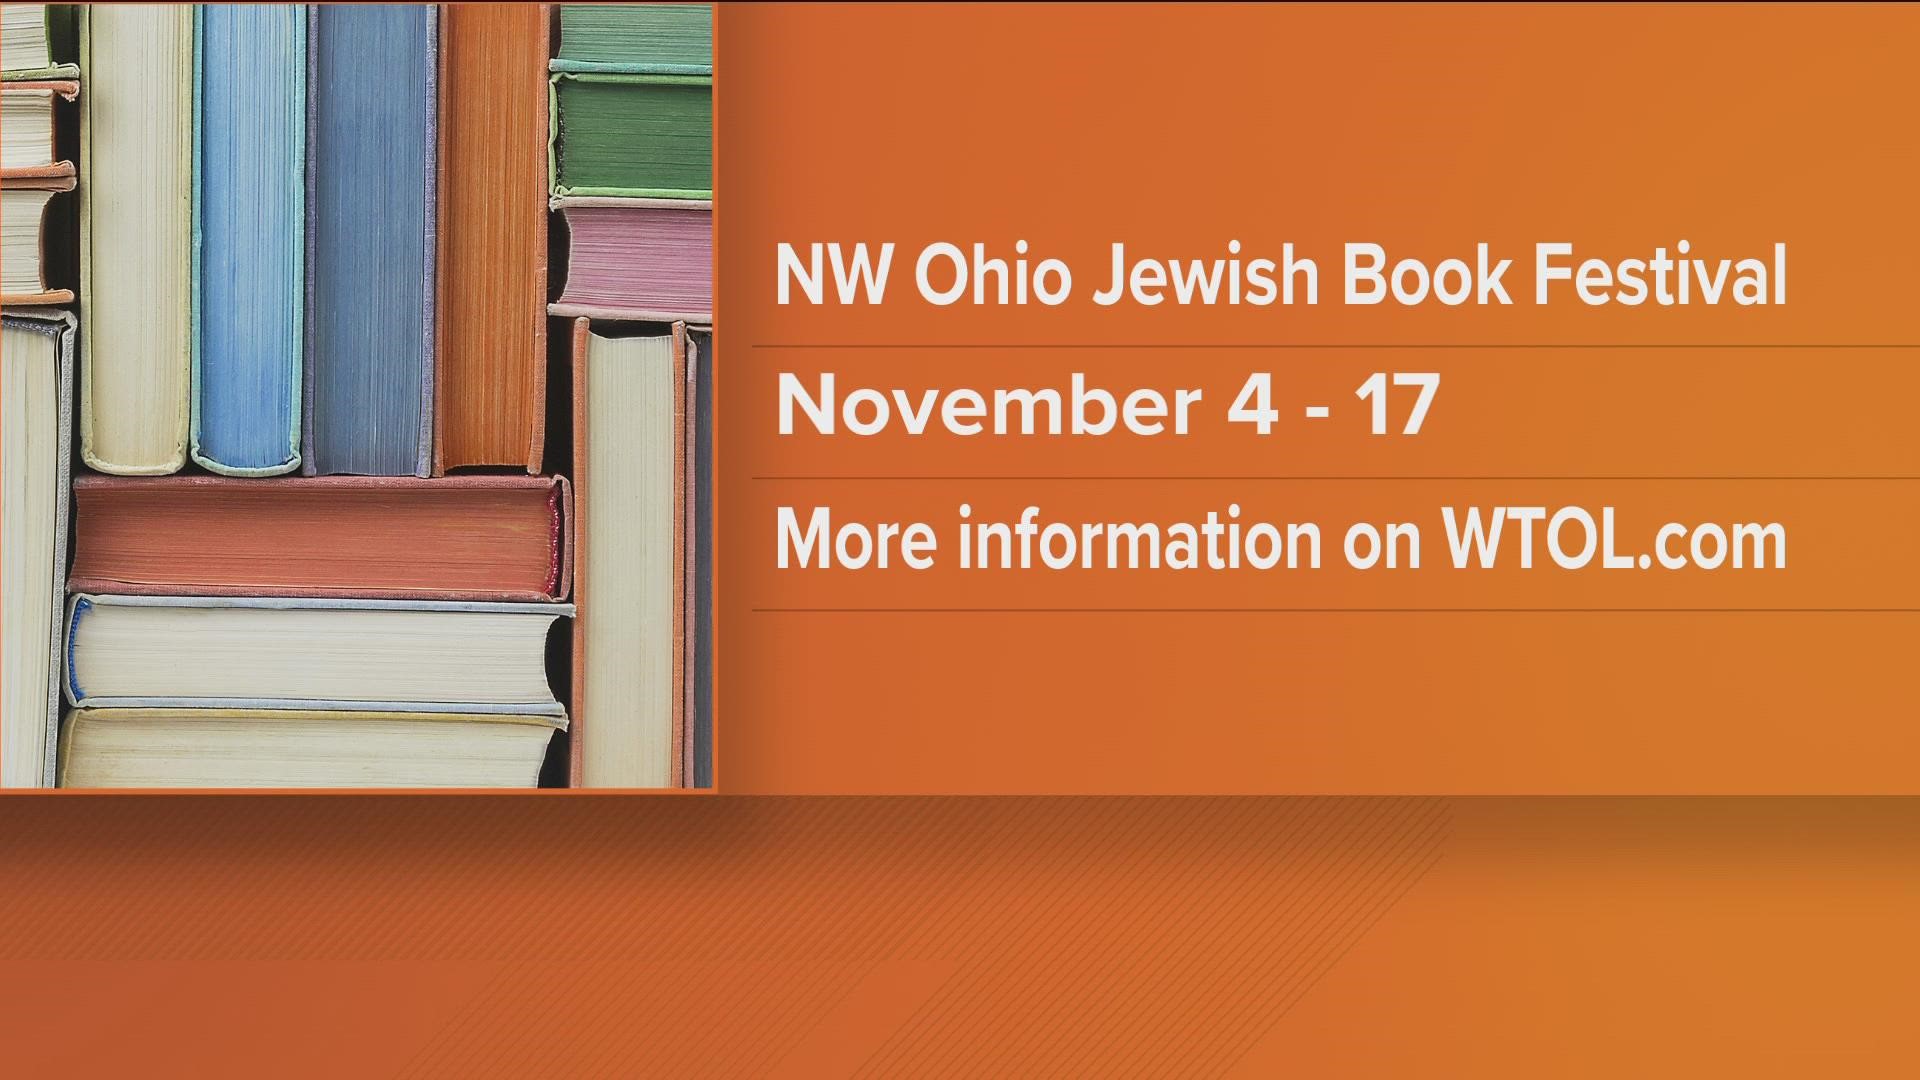 From Nov. 4-17, you'll get the chance to participate in activities, food demonstrations, discussions and more as you hear from compelling Jewish authors.